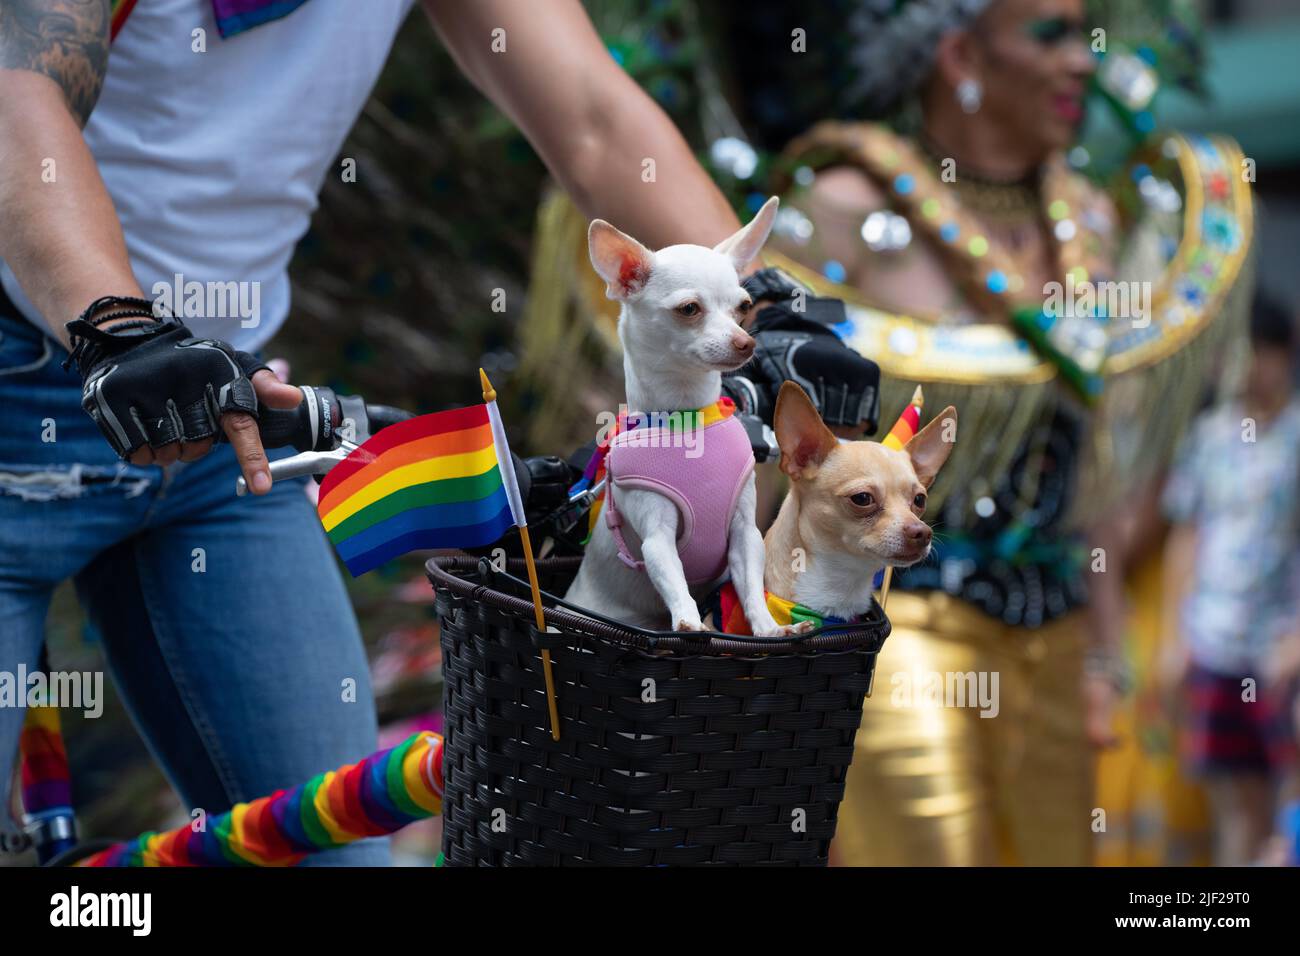 Two chihuahuas participate in the Toronto Pride Parade by riding in a bike basket. Stock Photo